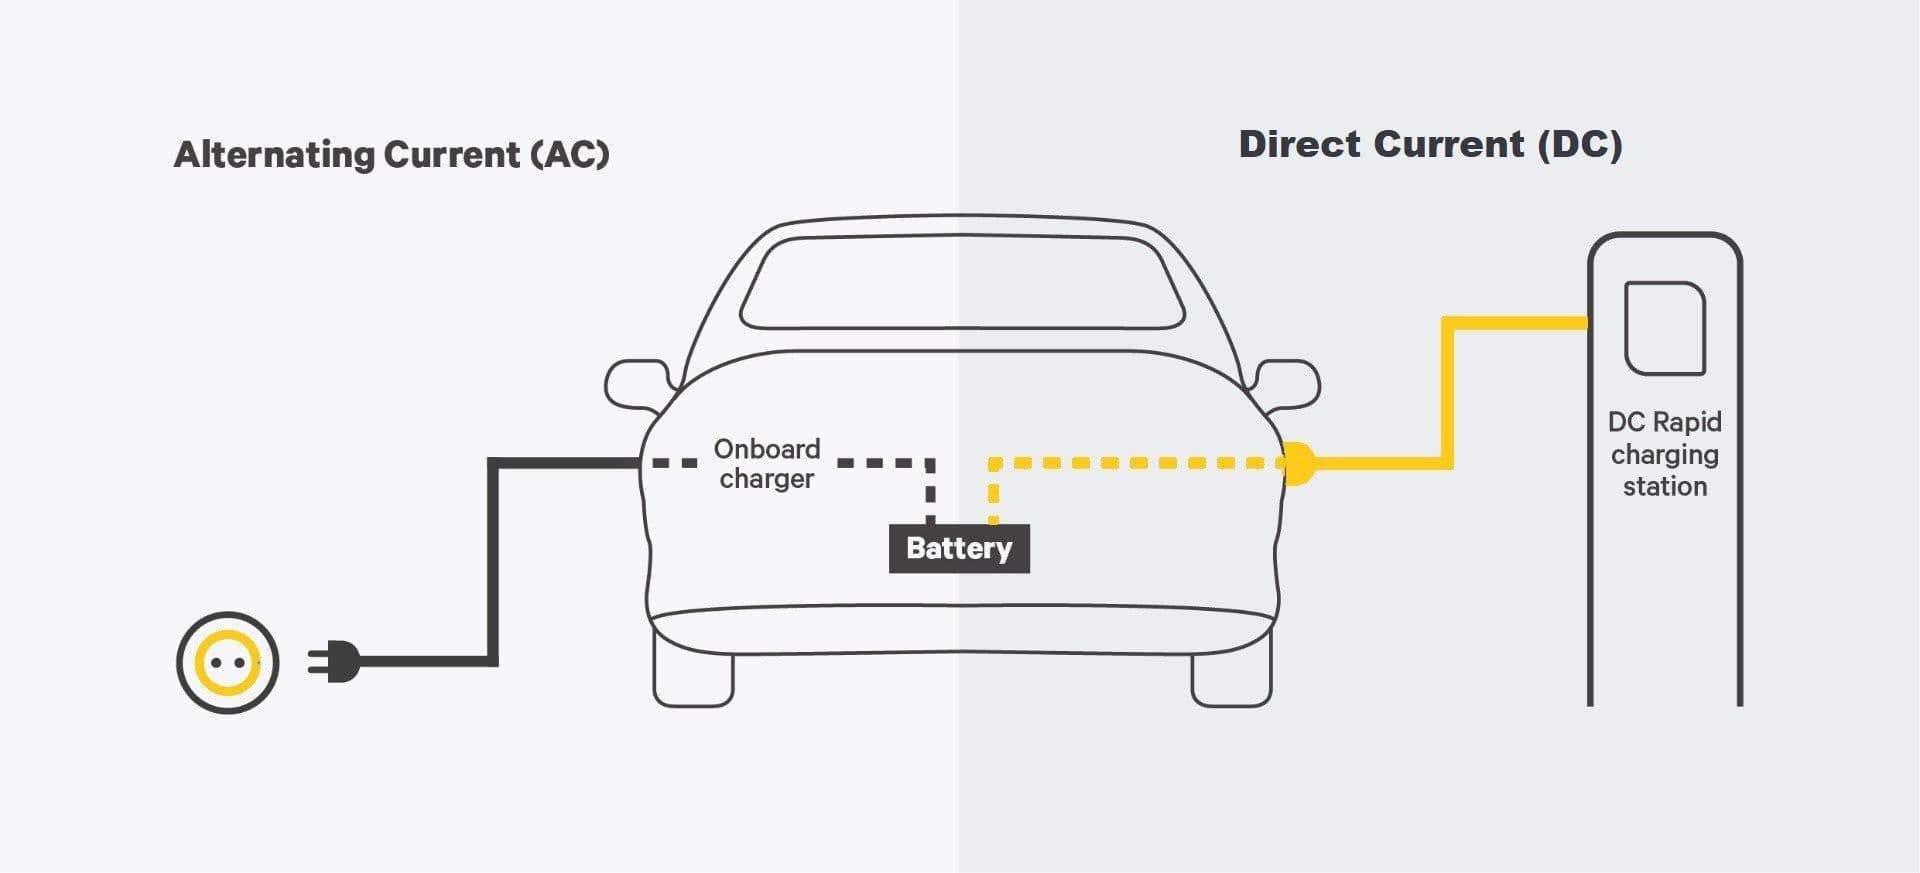 The two ways an electric car can be charged